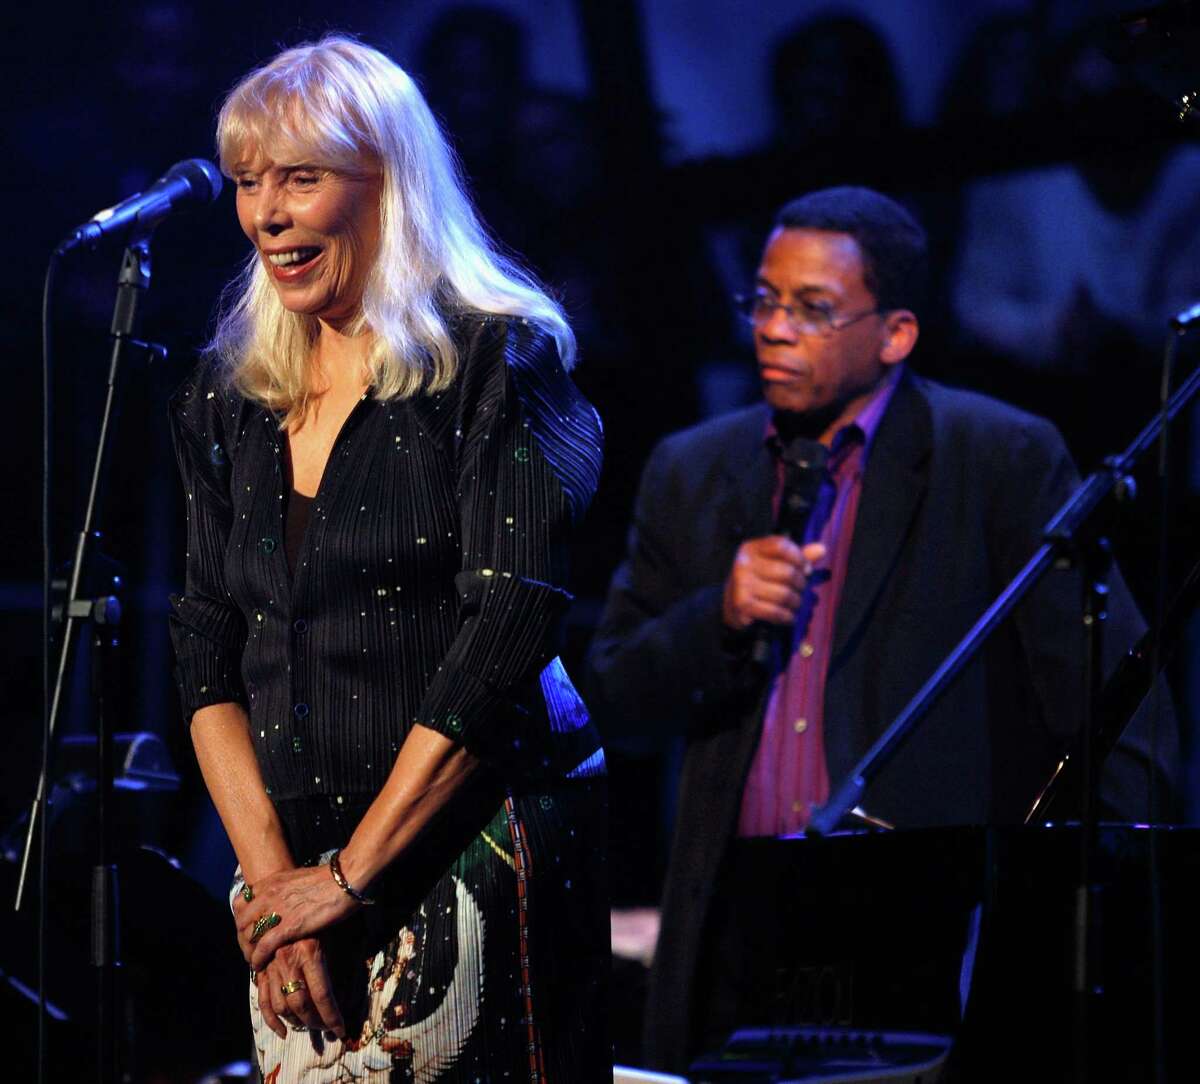 This March 20, 2008 file photo shows Joni Mitchell, left, and Herbie Hancock perform as part of Nissan Live Sets on Yahoo! Music in Los Angeles.